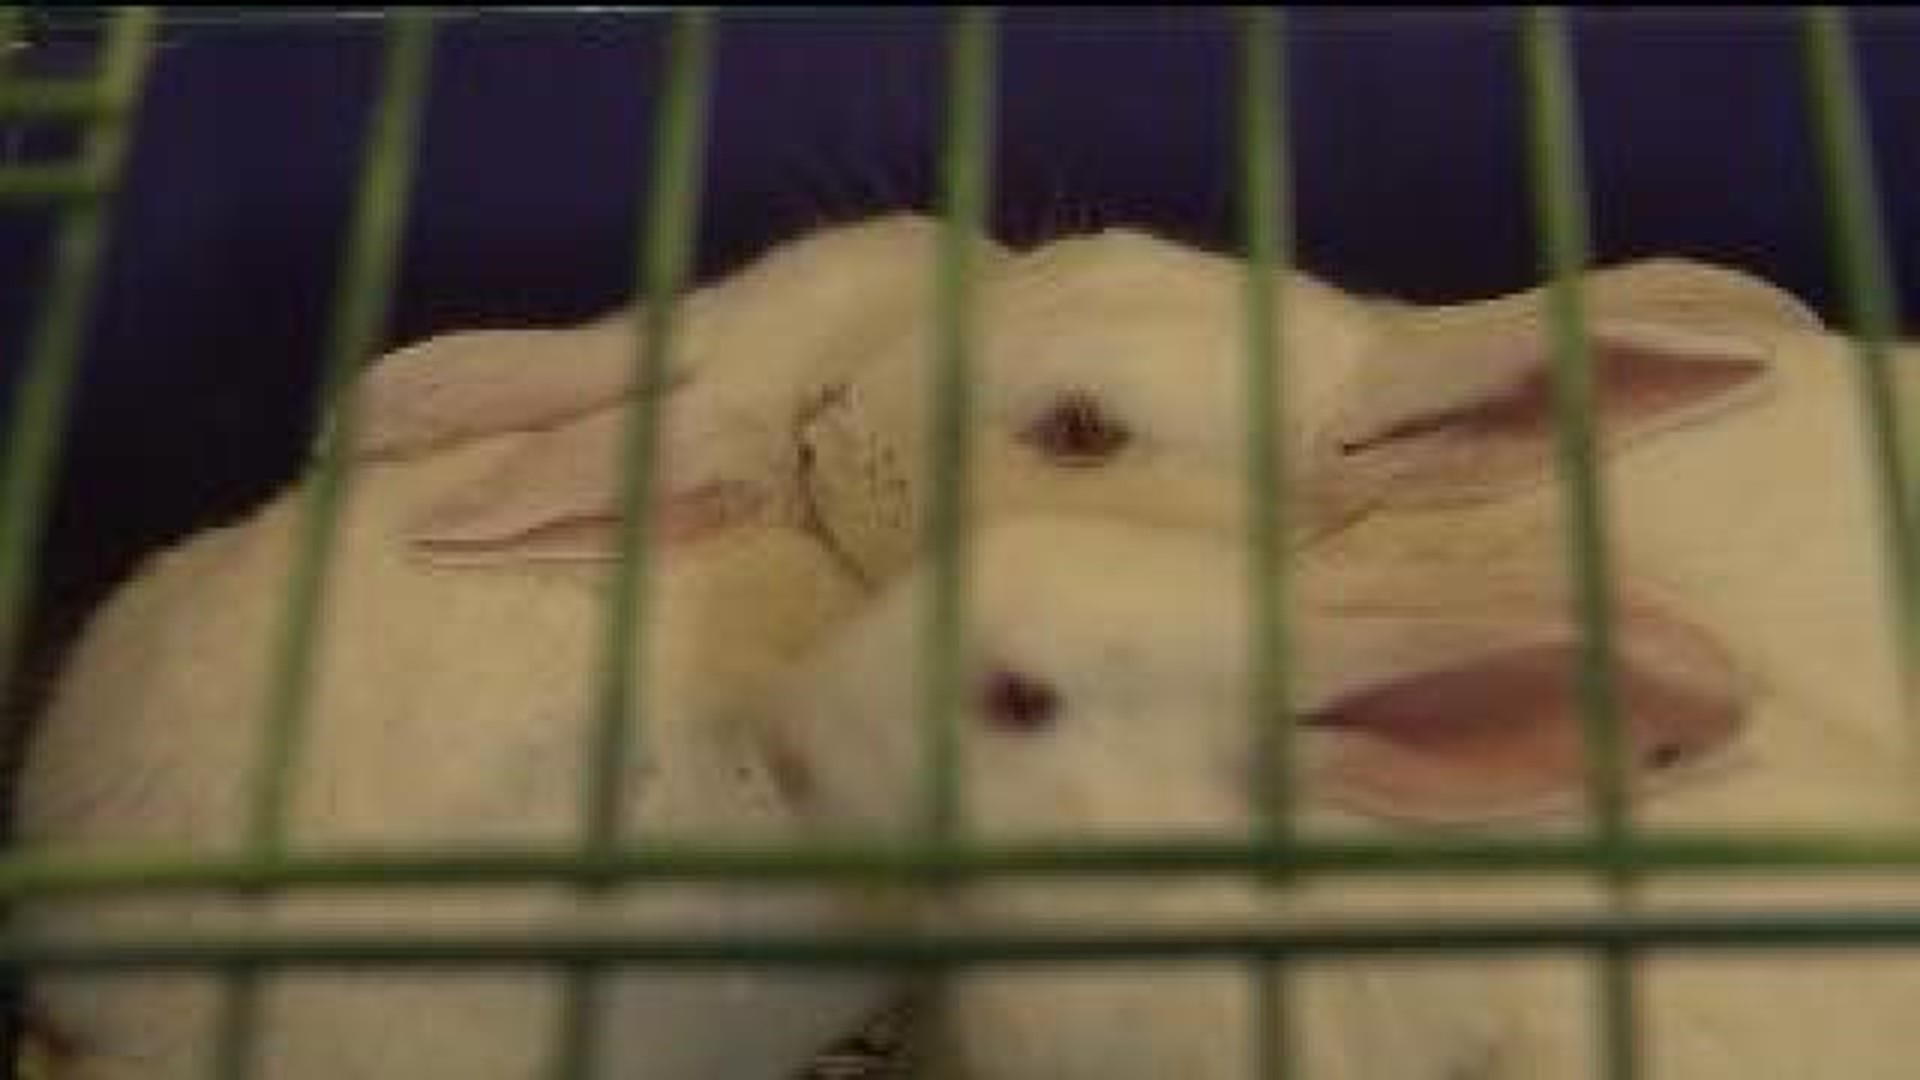 50 Rabbits Seized From a Farm in Lycoming County